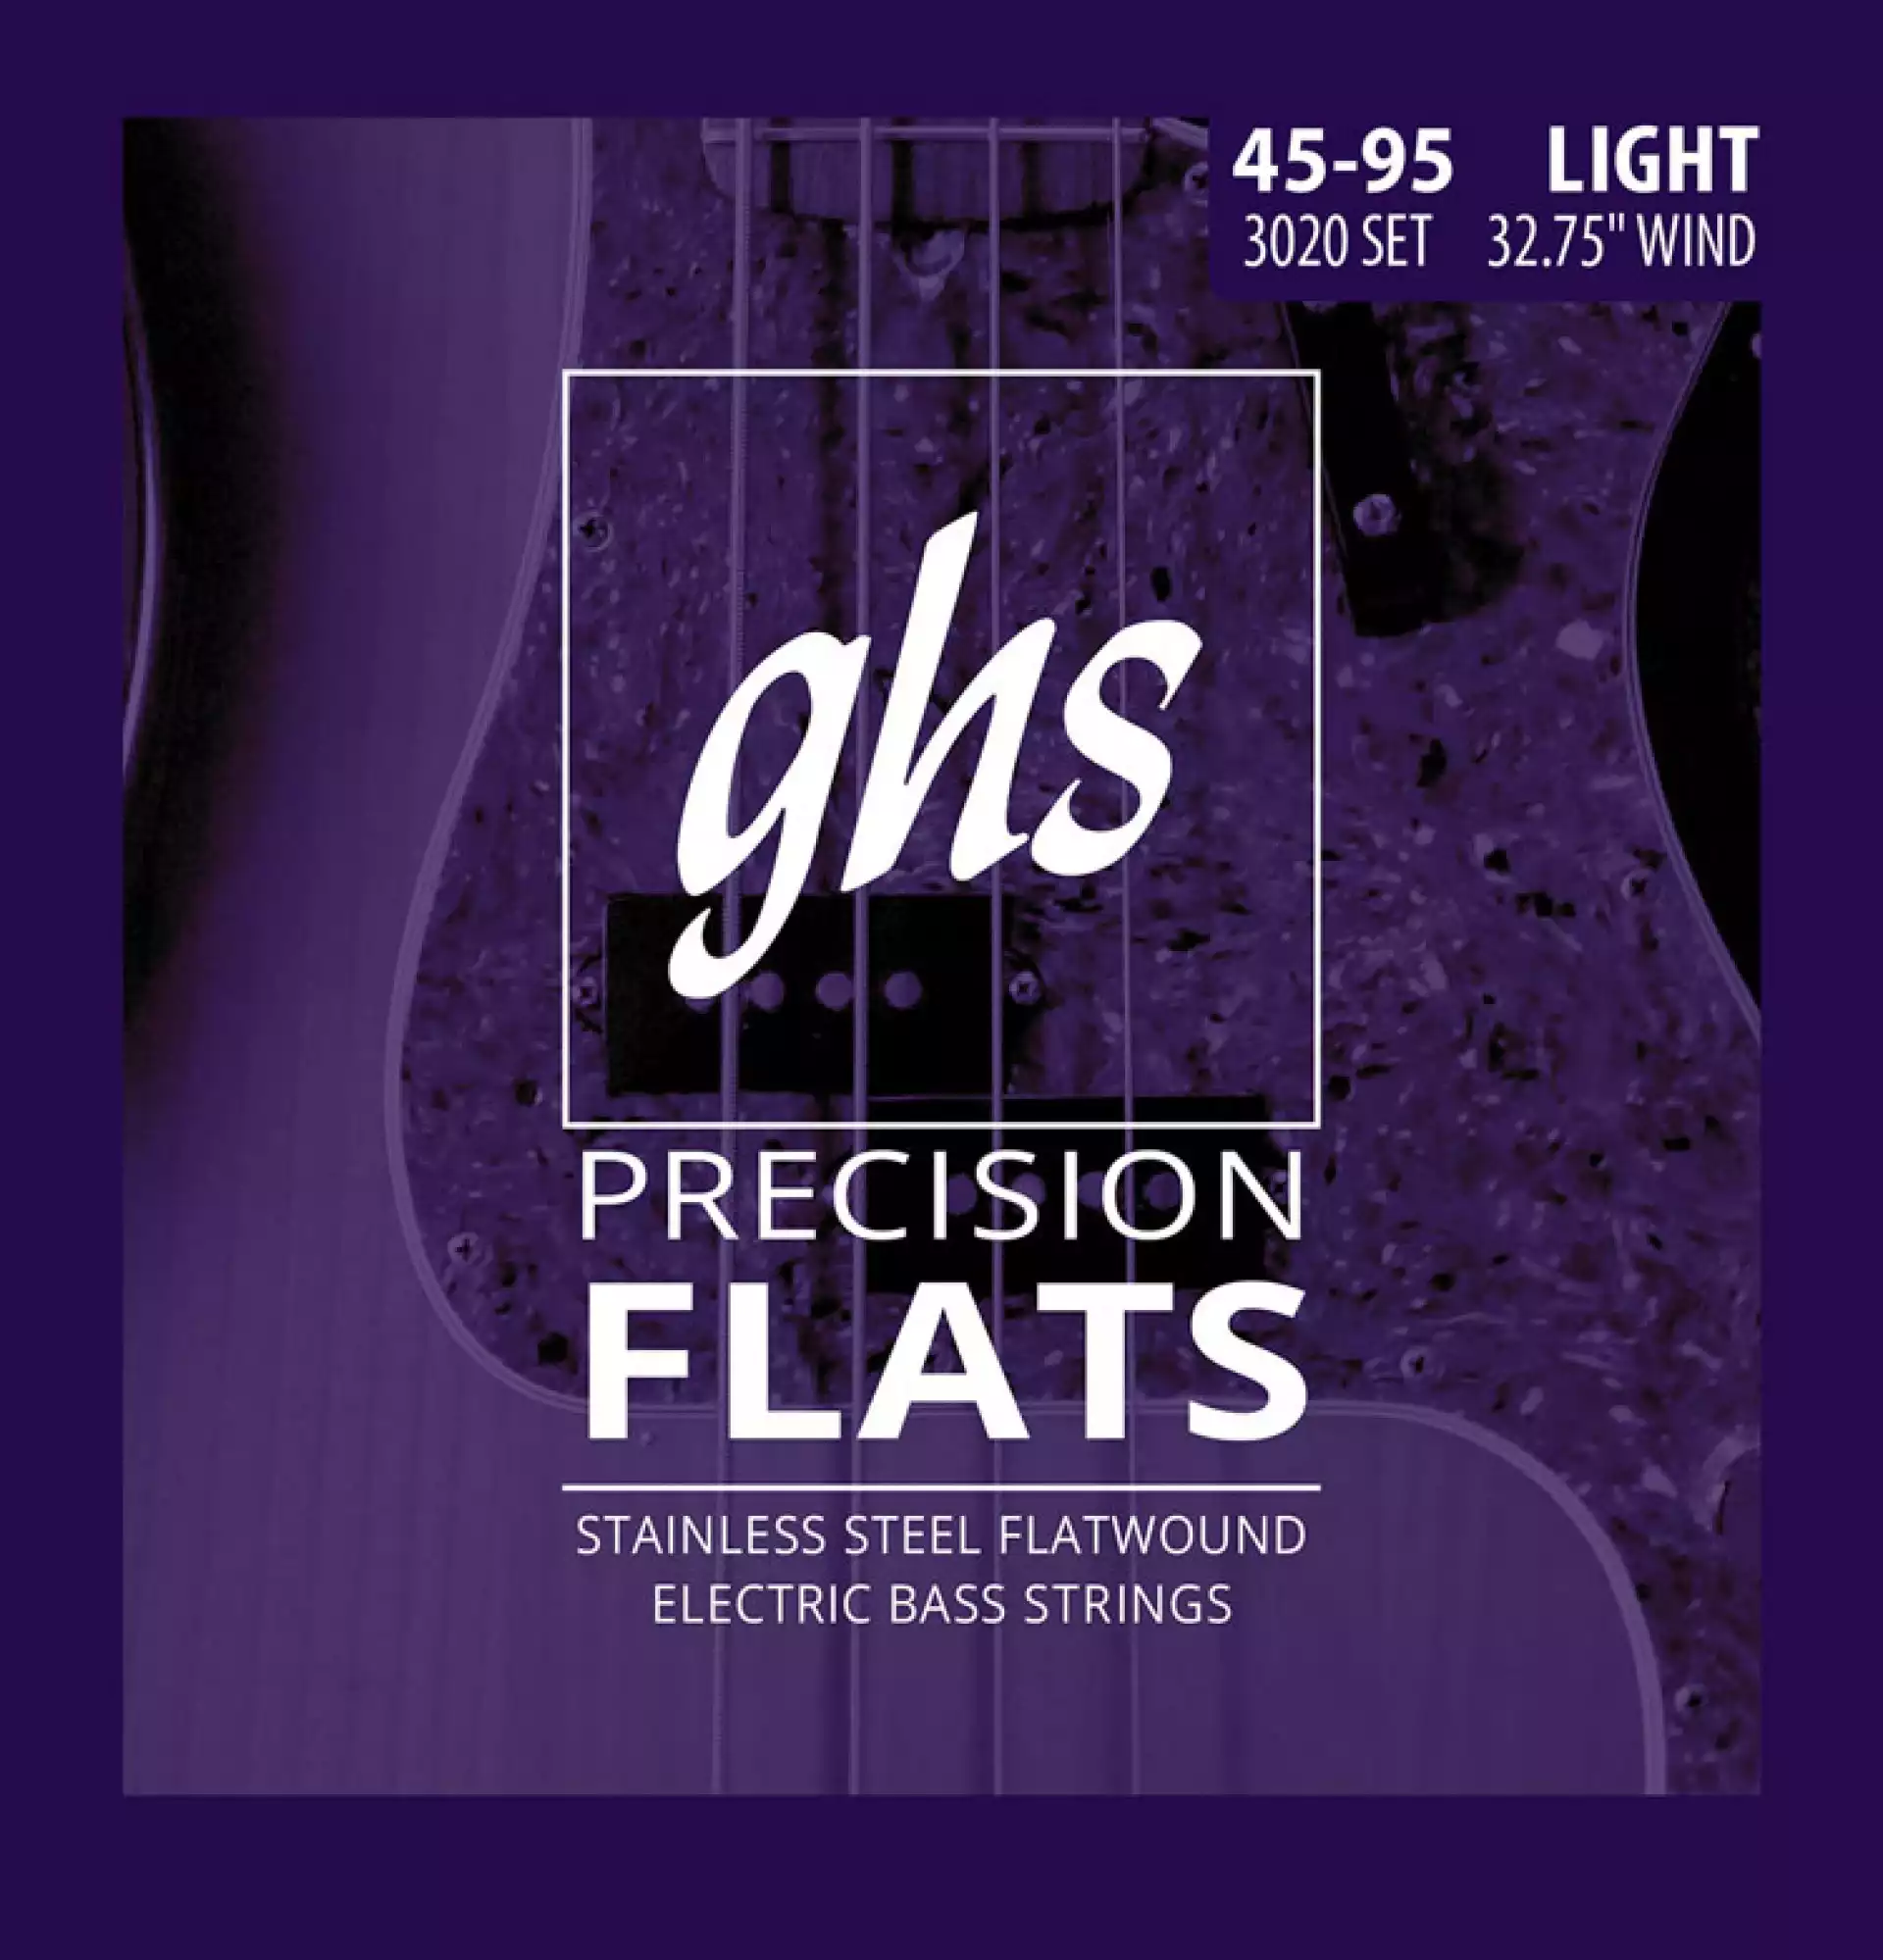 GHS 3020 Precision Flats Flatwound Bass Strings Short Scale - 4-String 45-095 Light